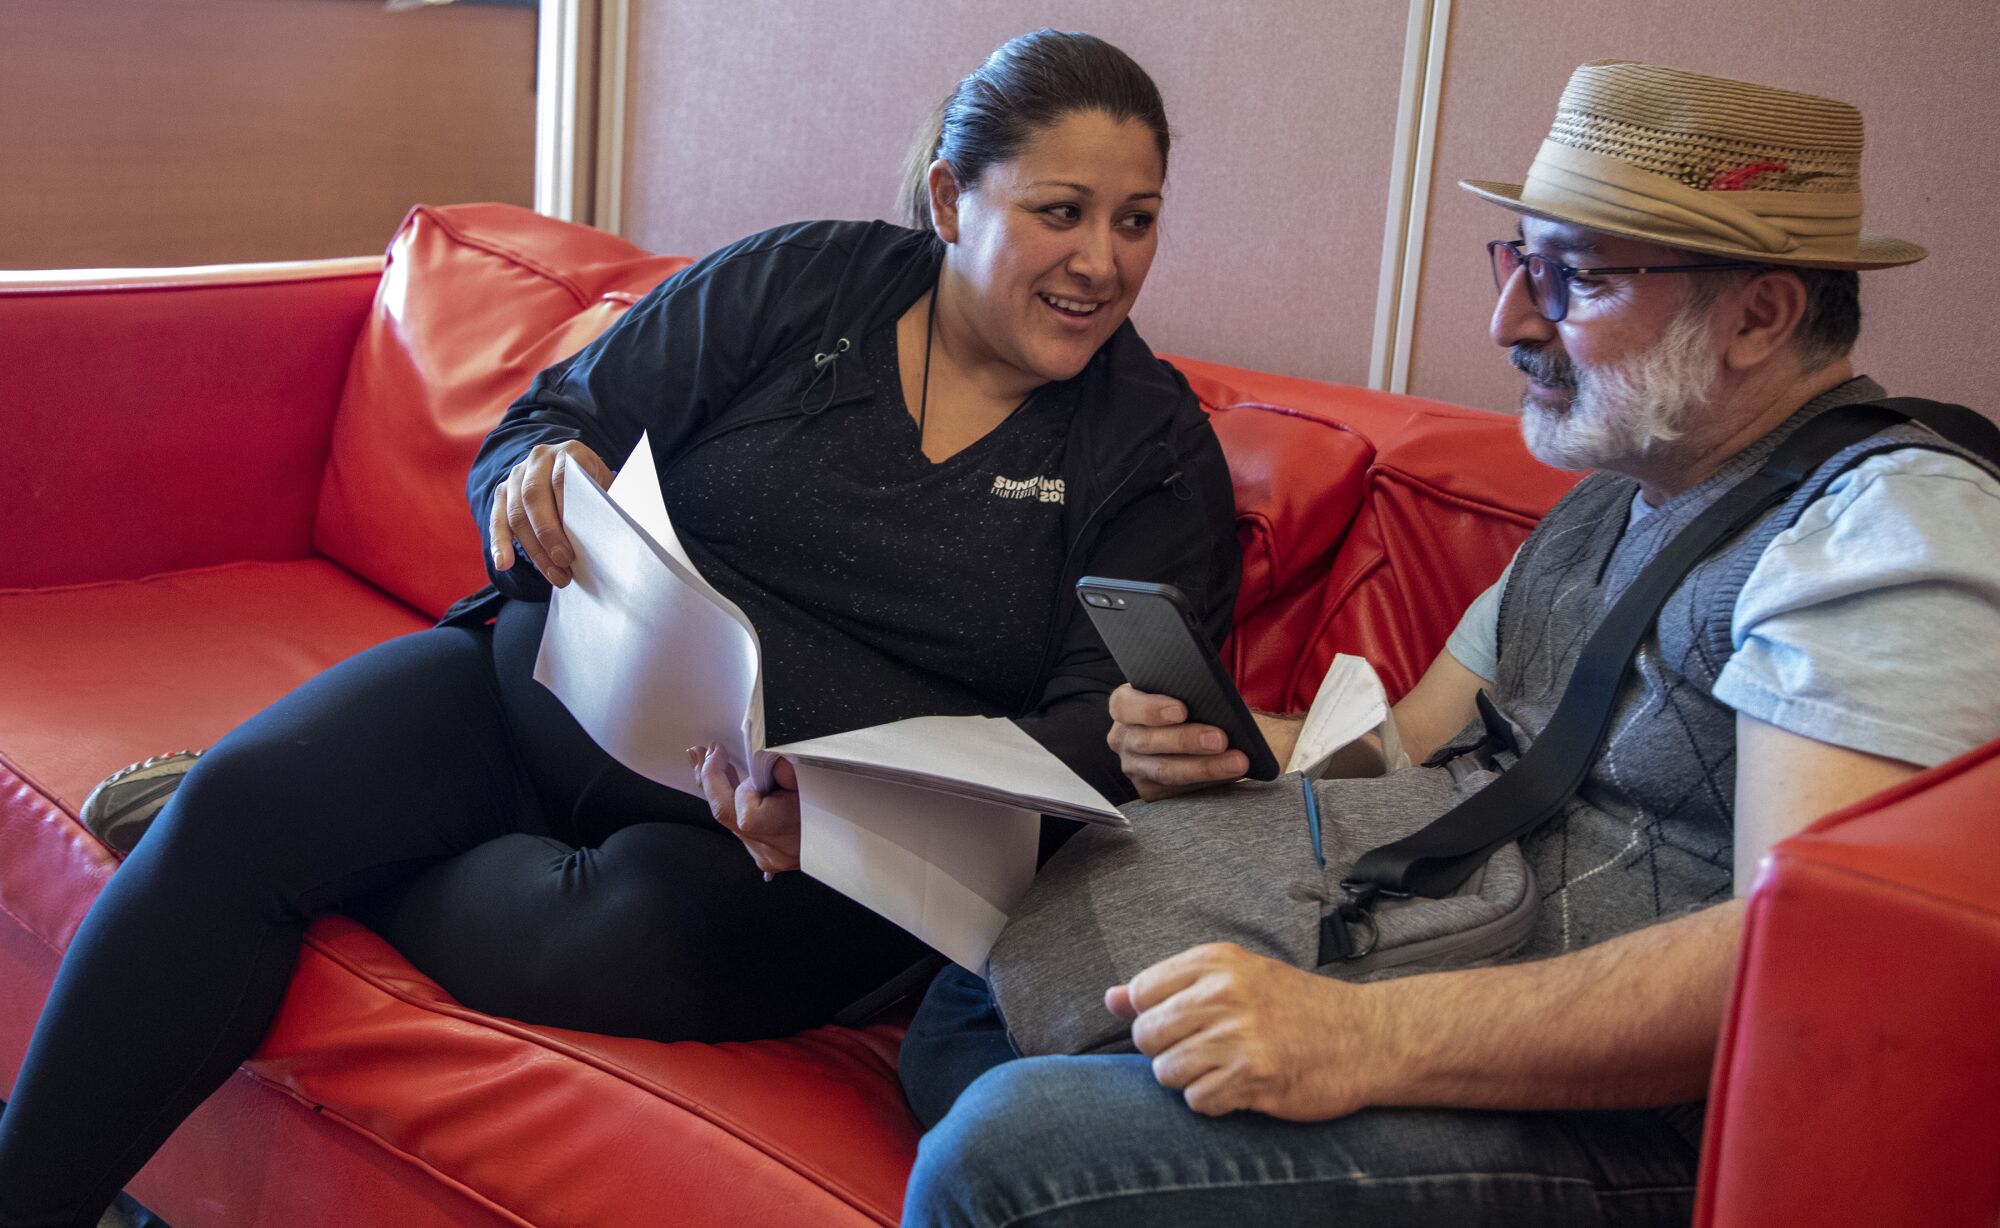 Yelyna De Leon, left, looks over a script with Edward Padilla at Casa 0101 Saturday, July 31, 2021 in Boyle Heights 